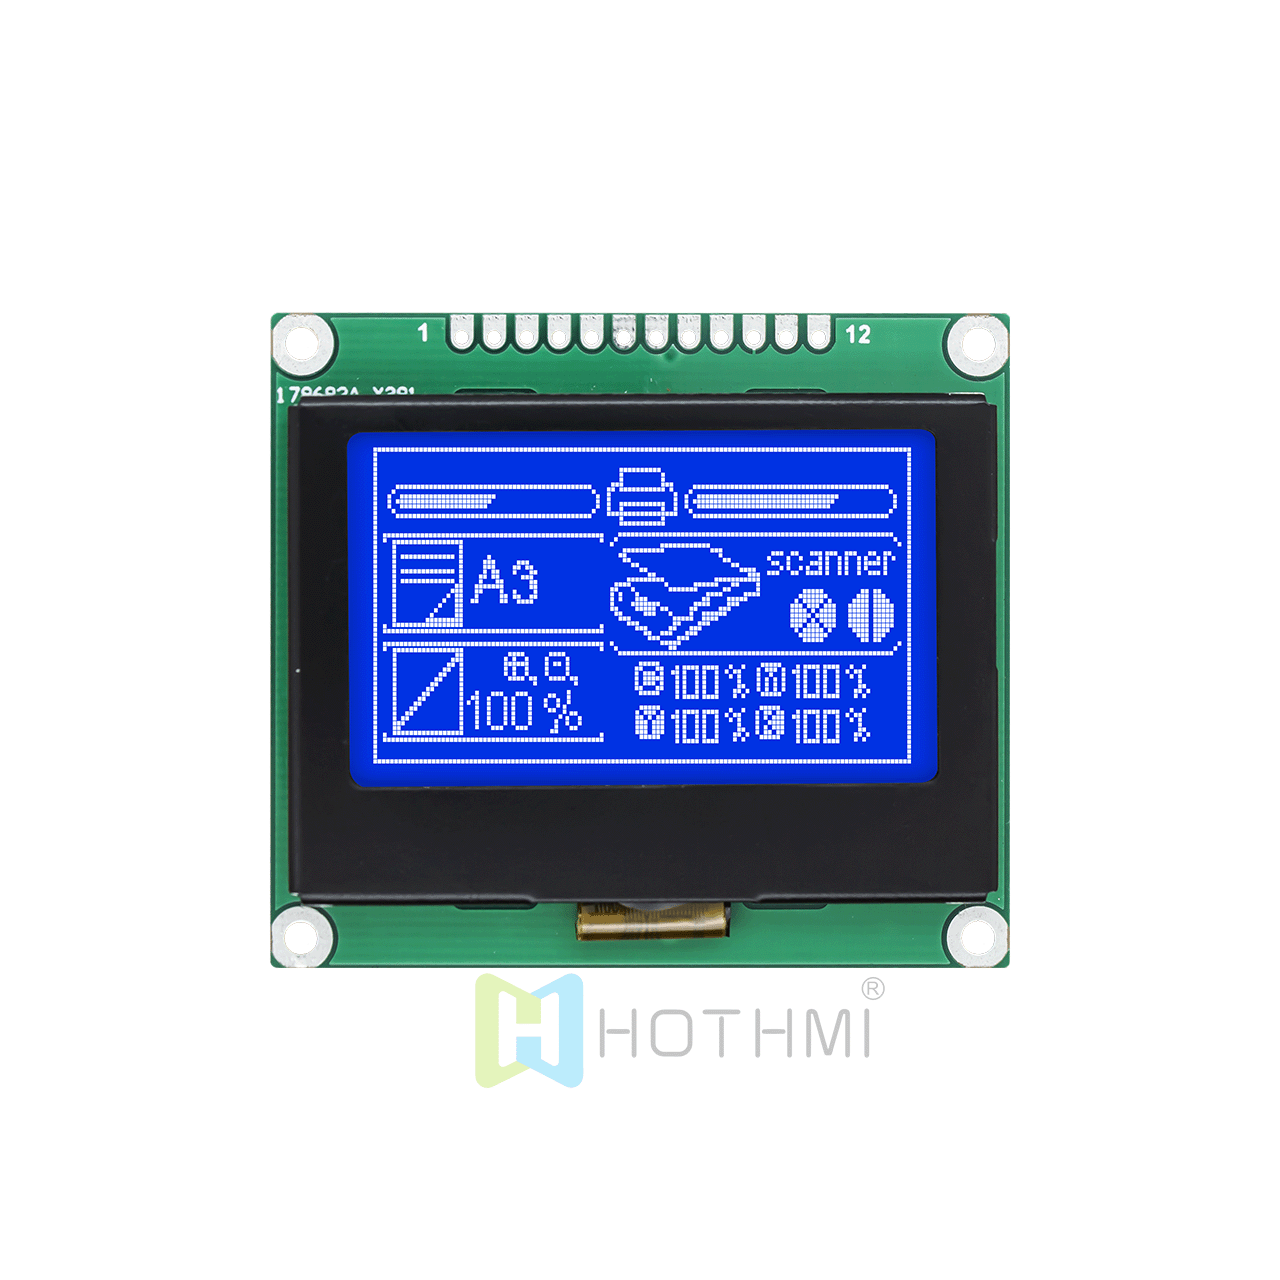 2-inch 128 x 64 LCD Graphic Liquid Crystal Display Module | 12864 Graphic Dot Matrix Module | STN Negative Display | White Text on Blue Background